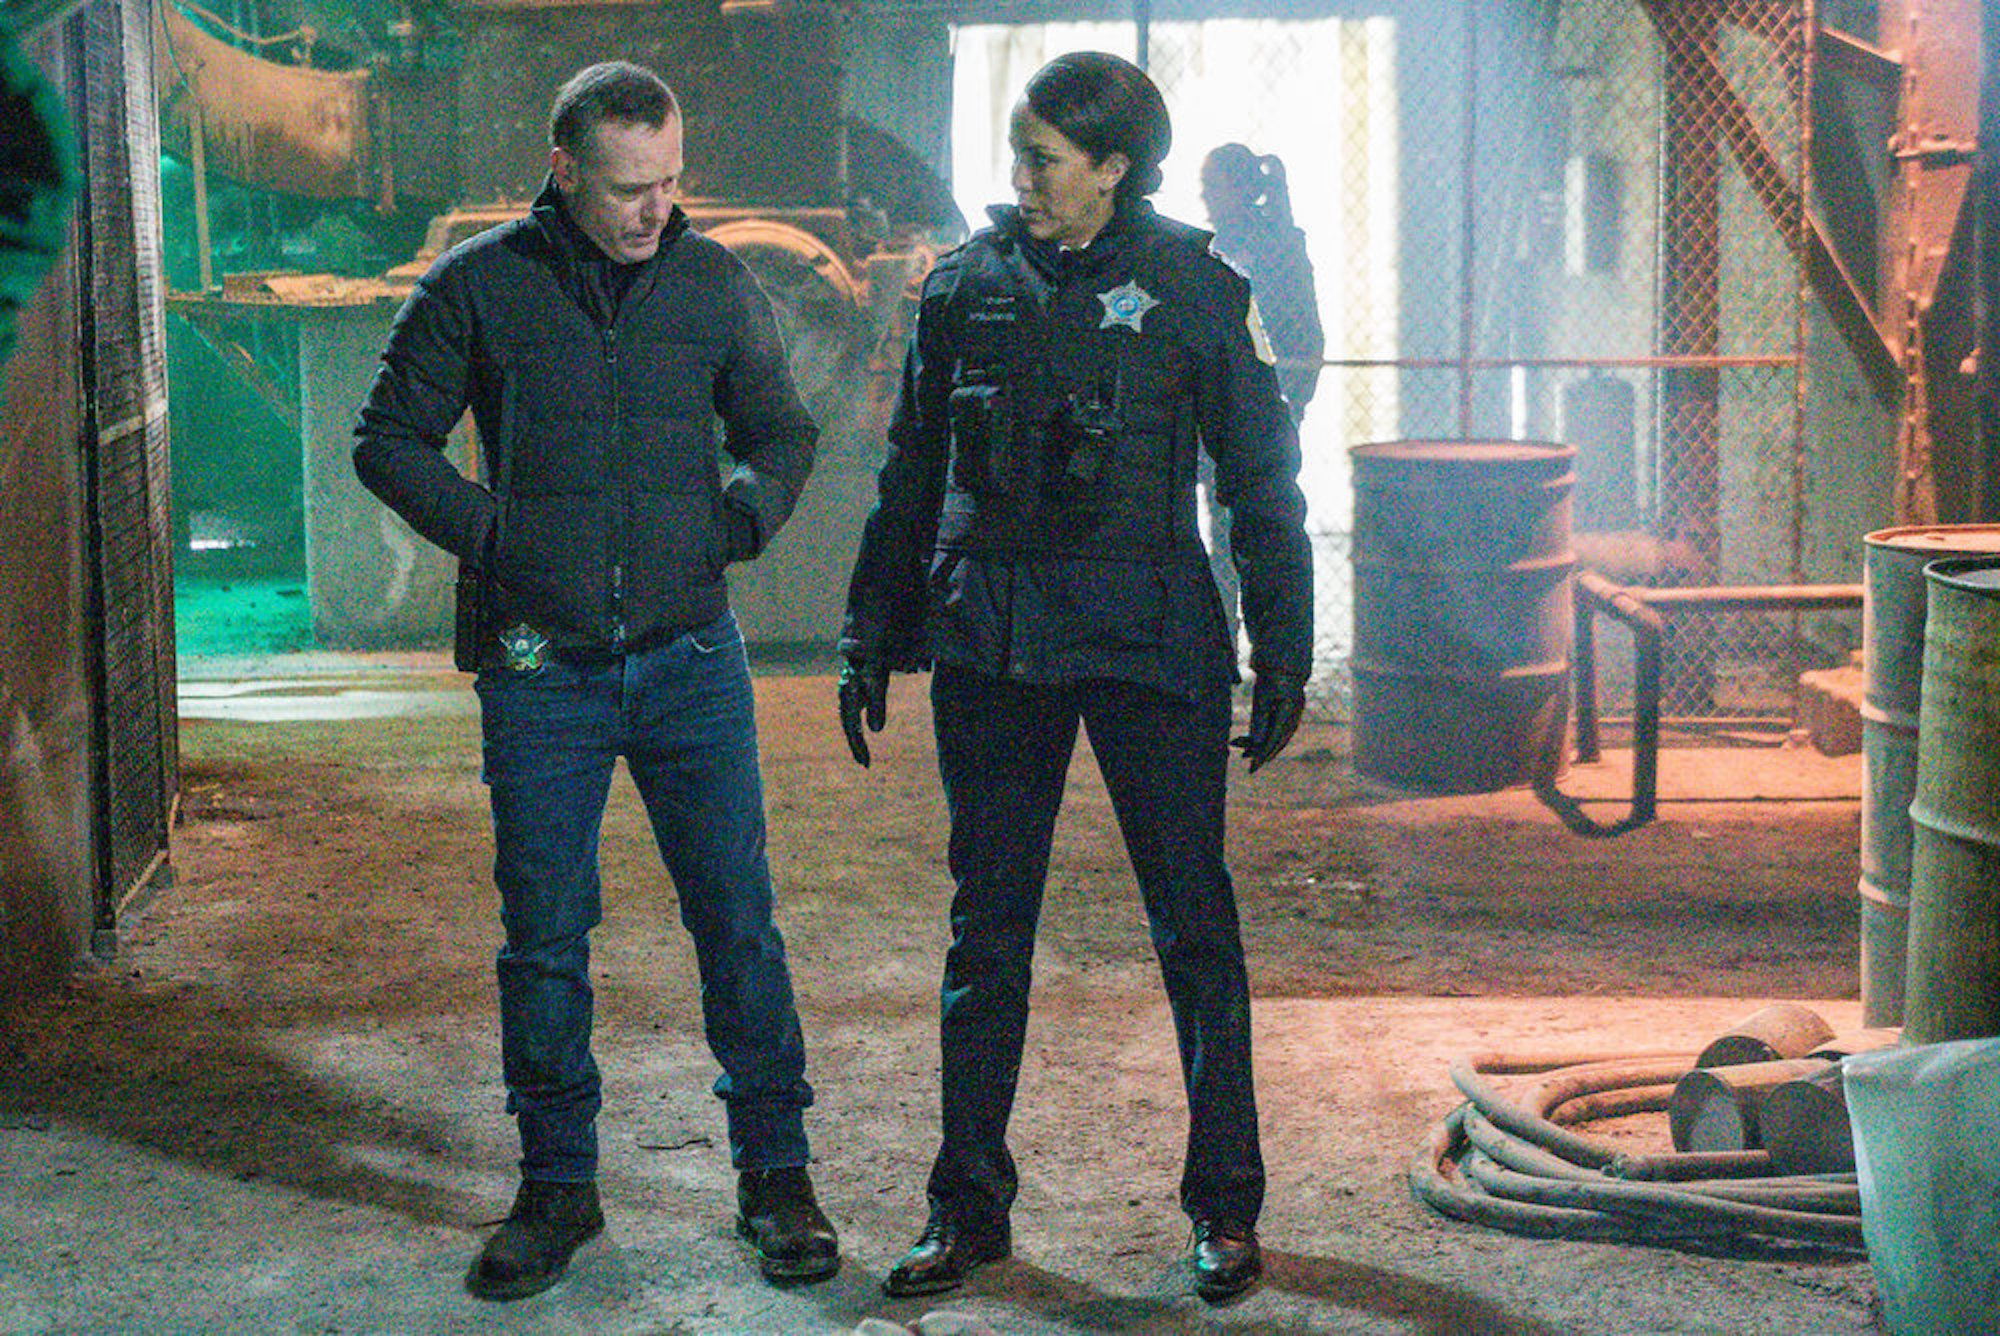 Hank Voight and Samantha Miller from 'Chicago P.D.' Season 9 standing together at a crime scene